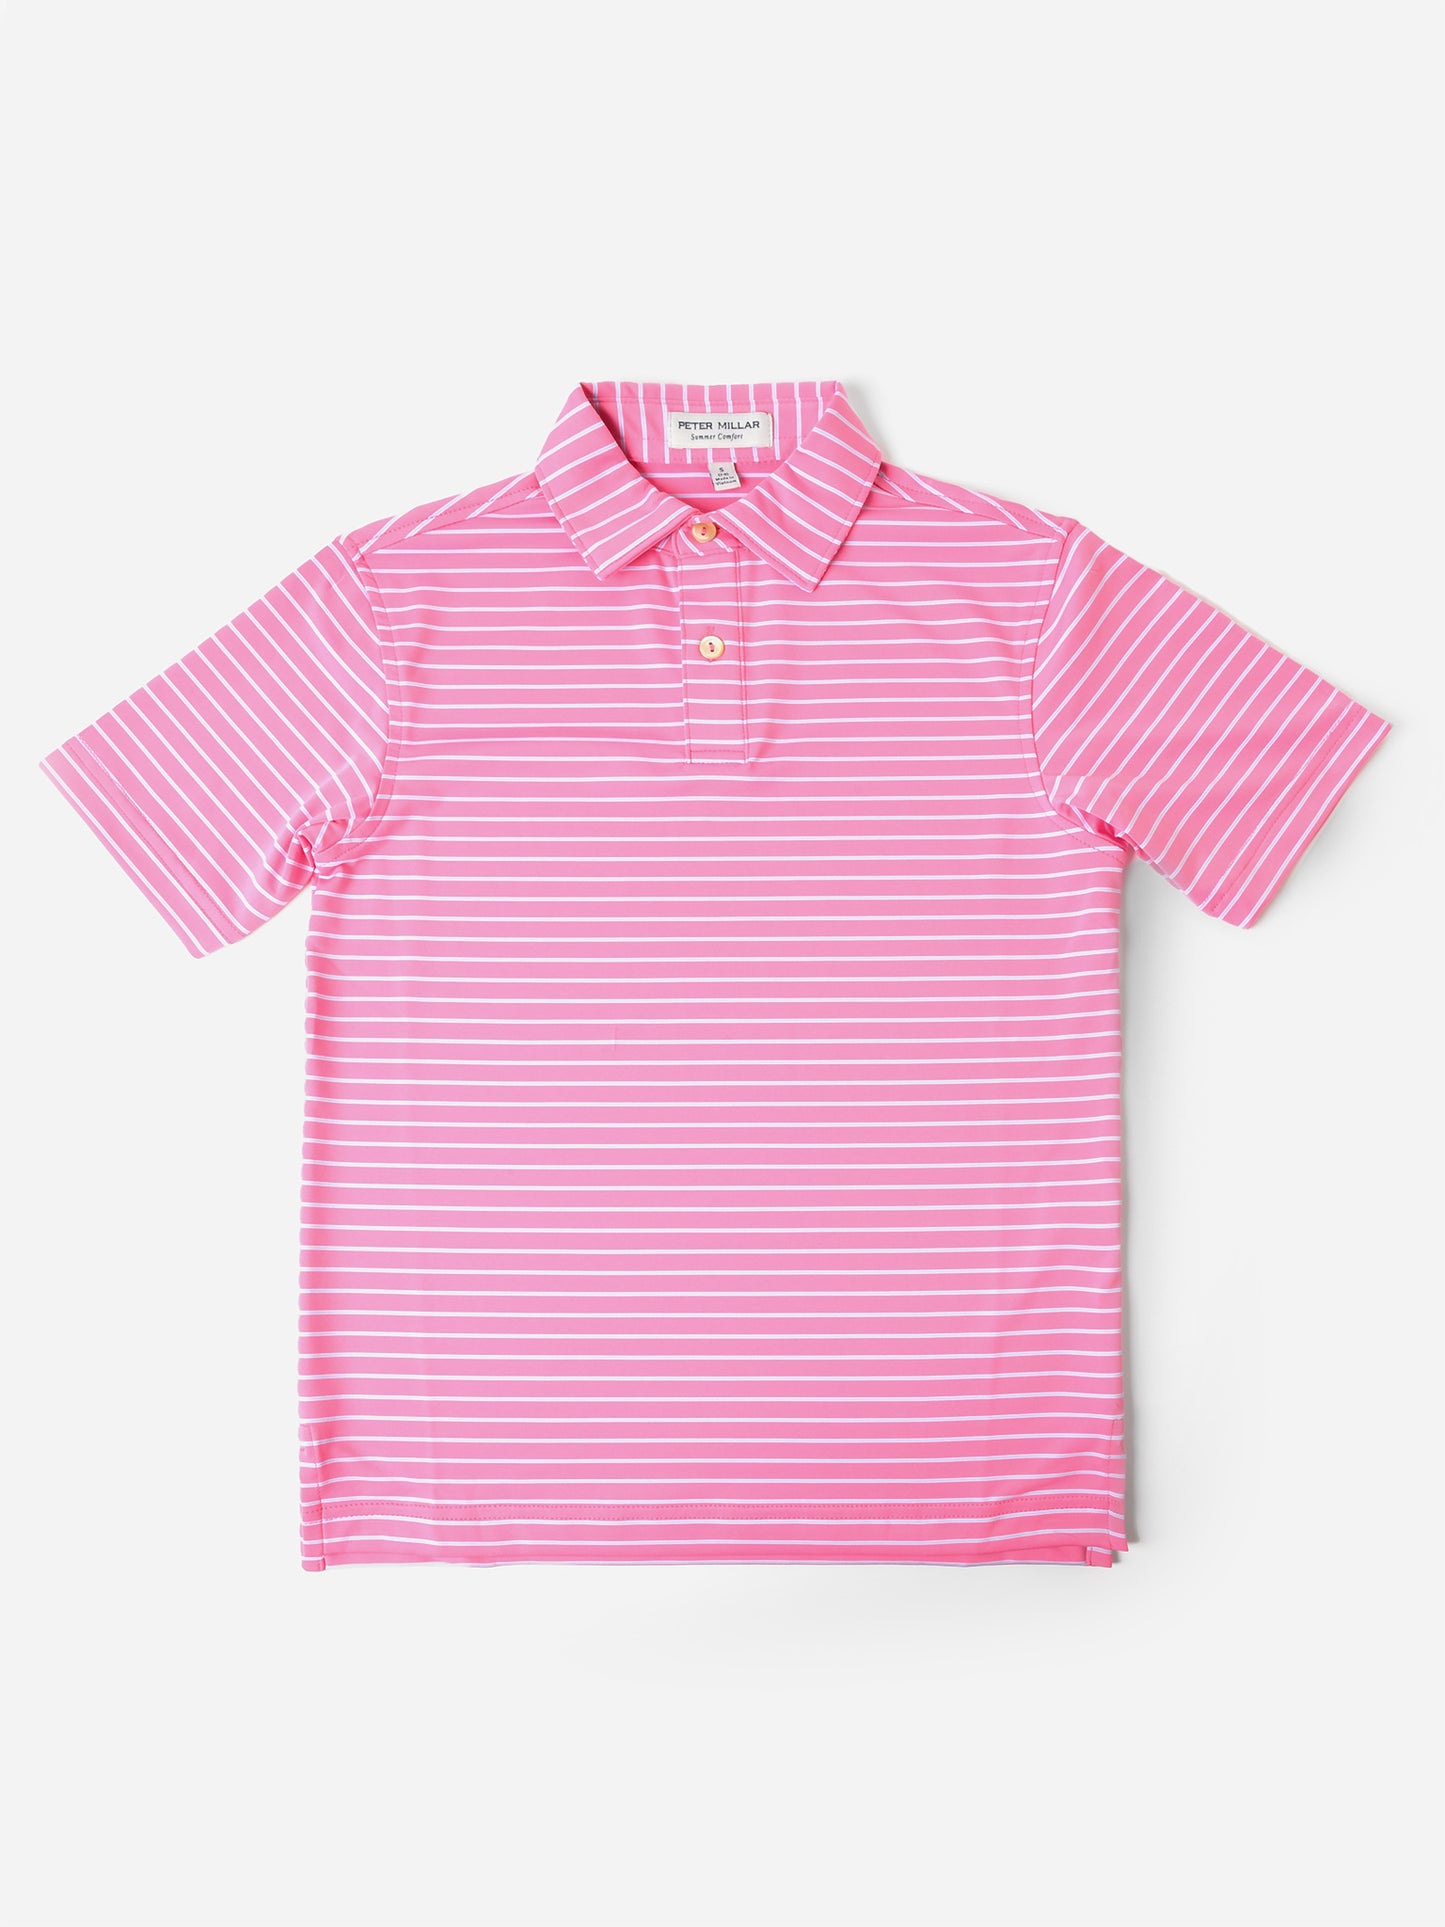 Peter Millar Youth Collection Boys' Drum Performance Jersey Polo